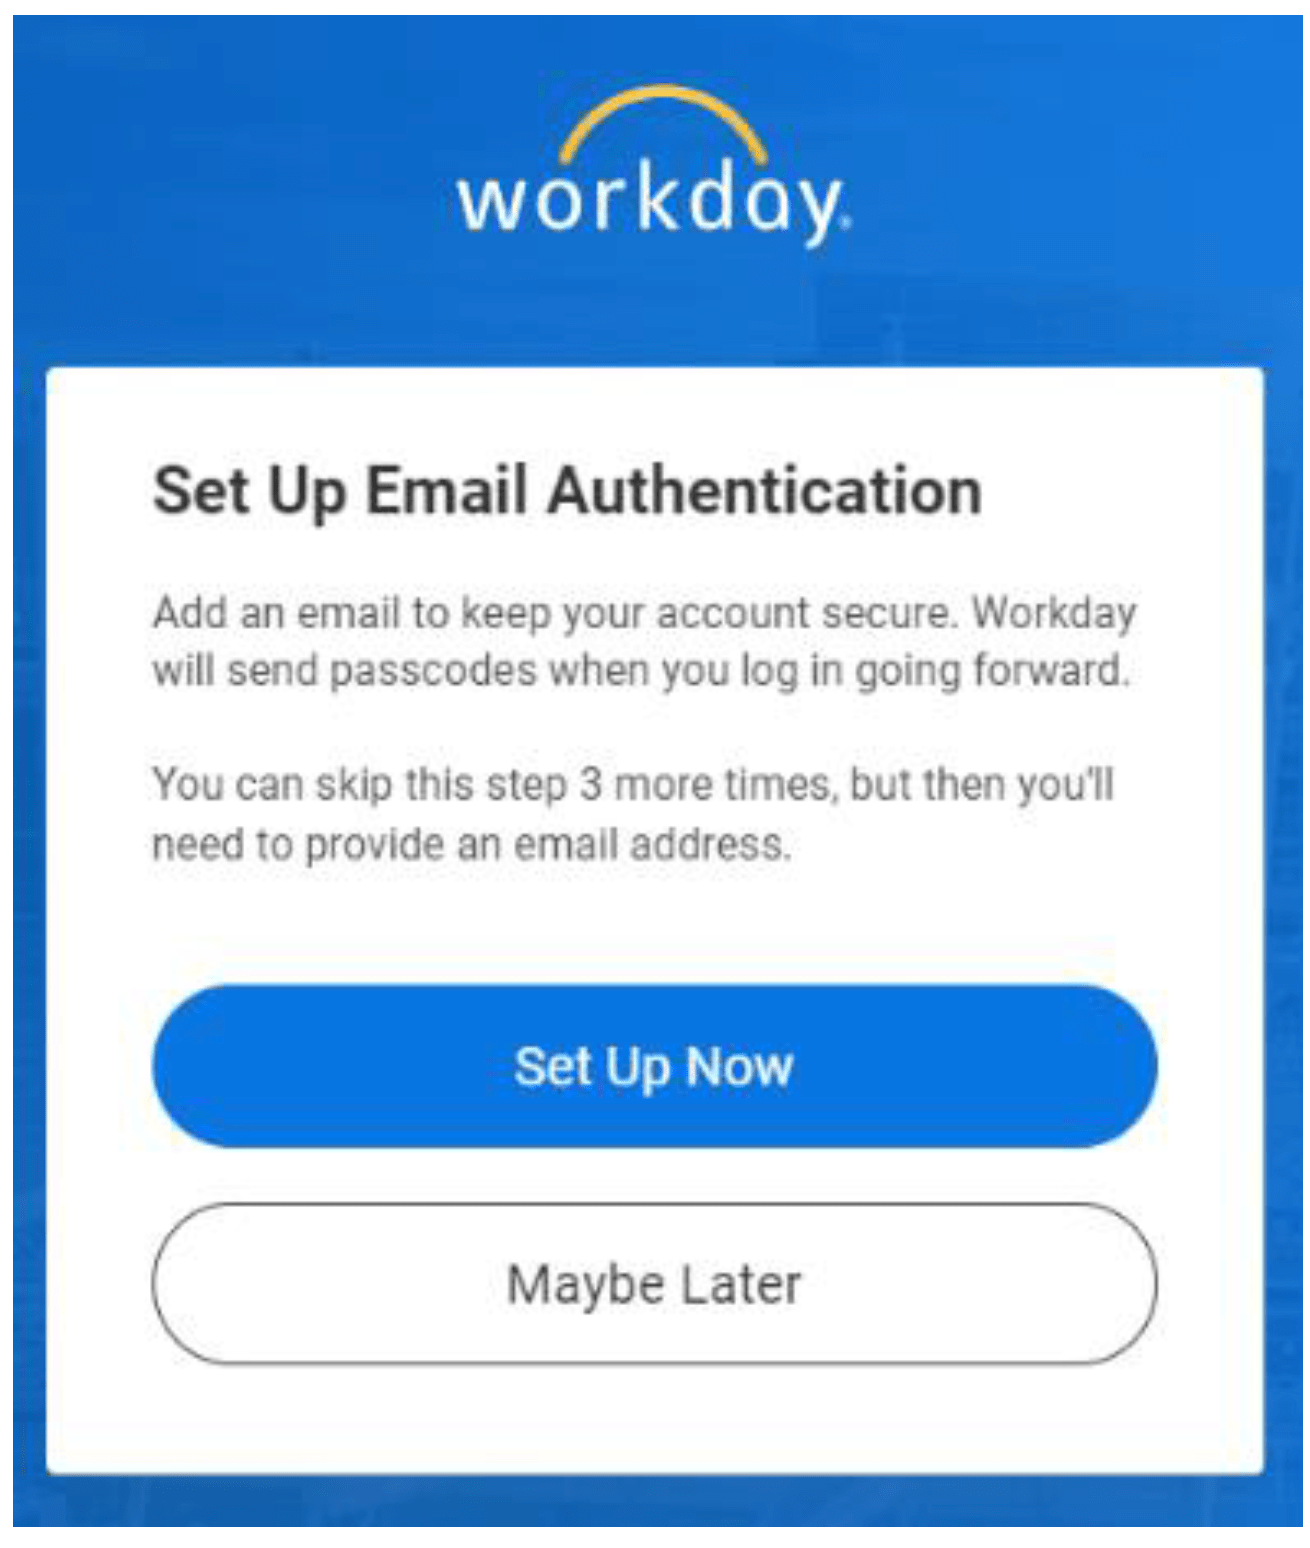 Workday set up email authentication